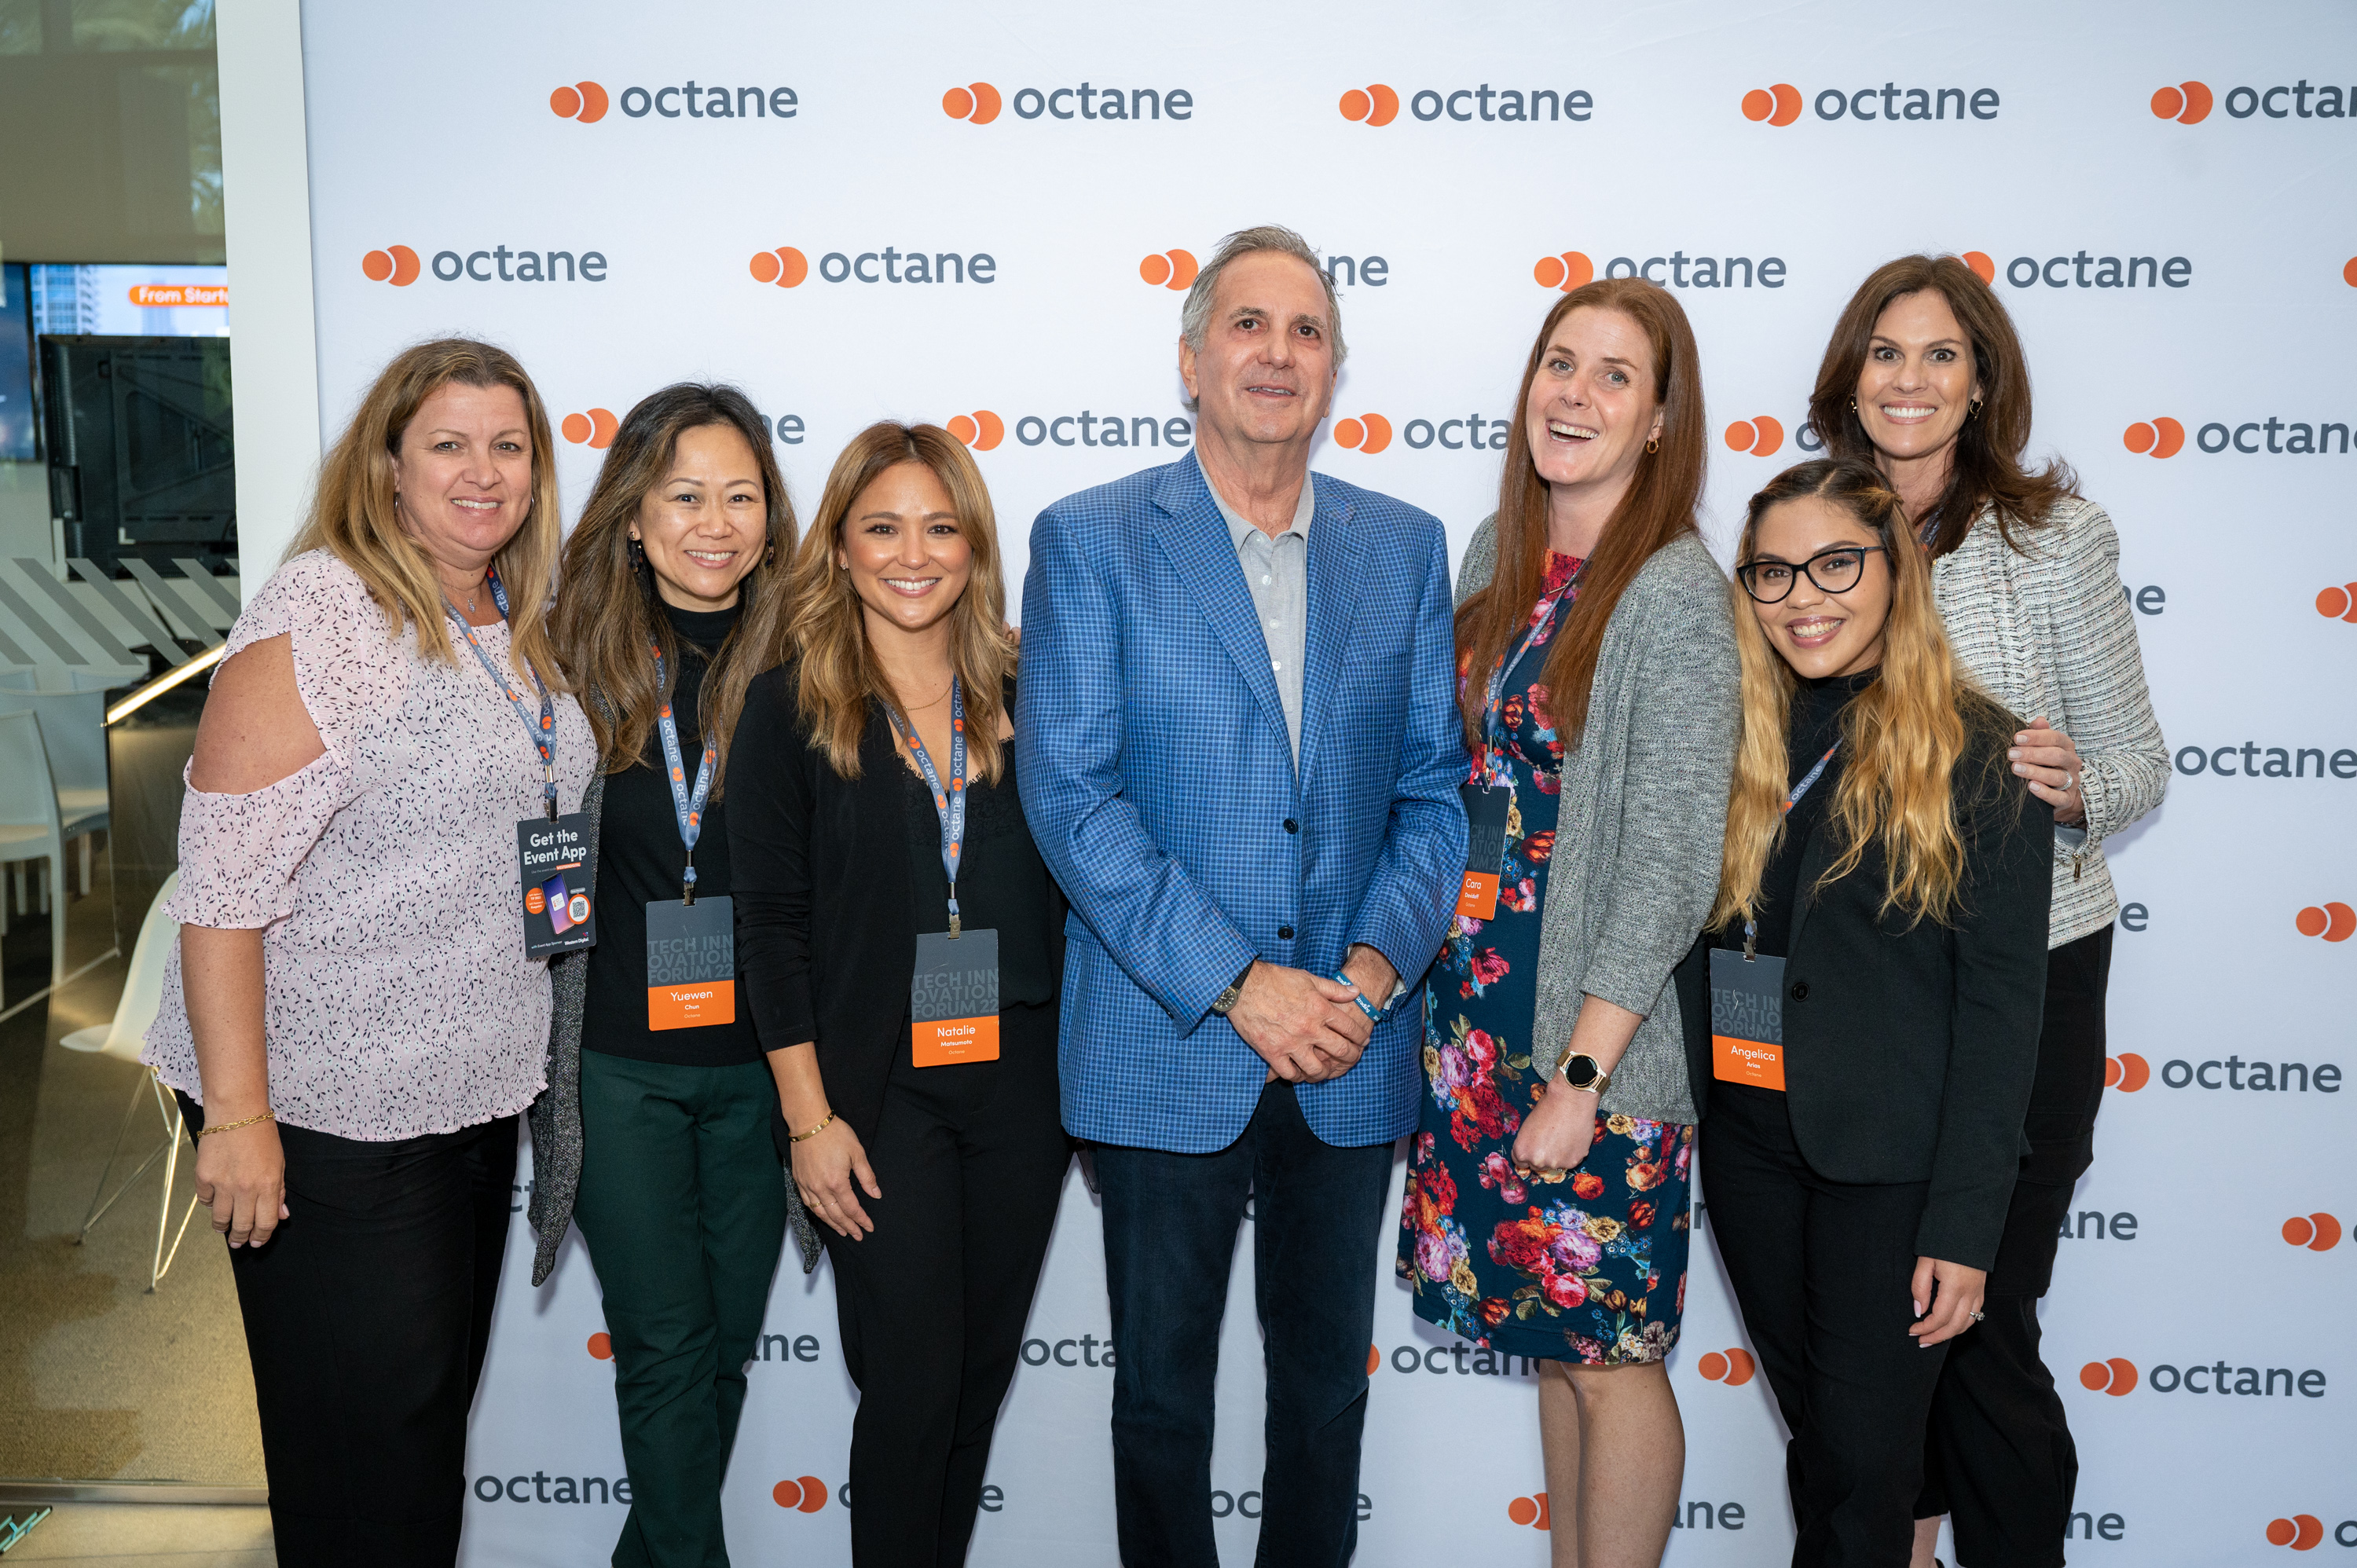 Octane is Recognized as One of The Best Places to Work In Orange County